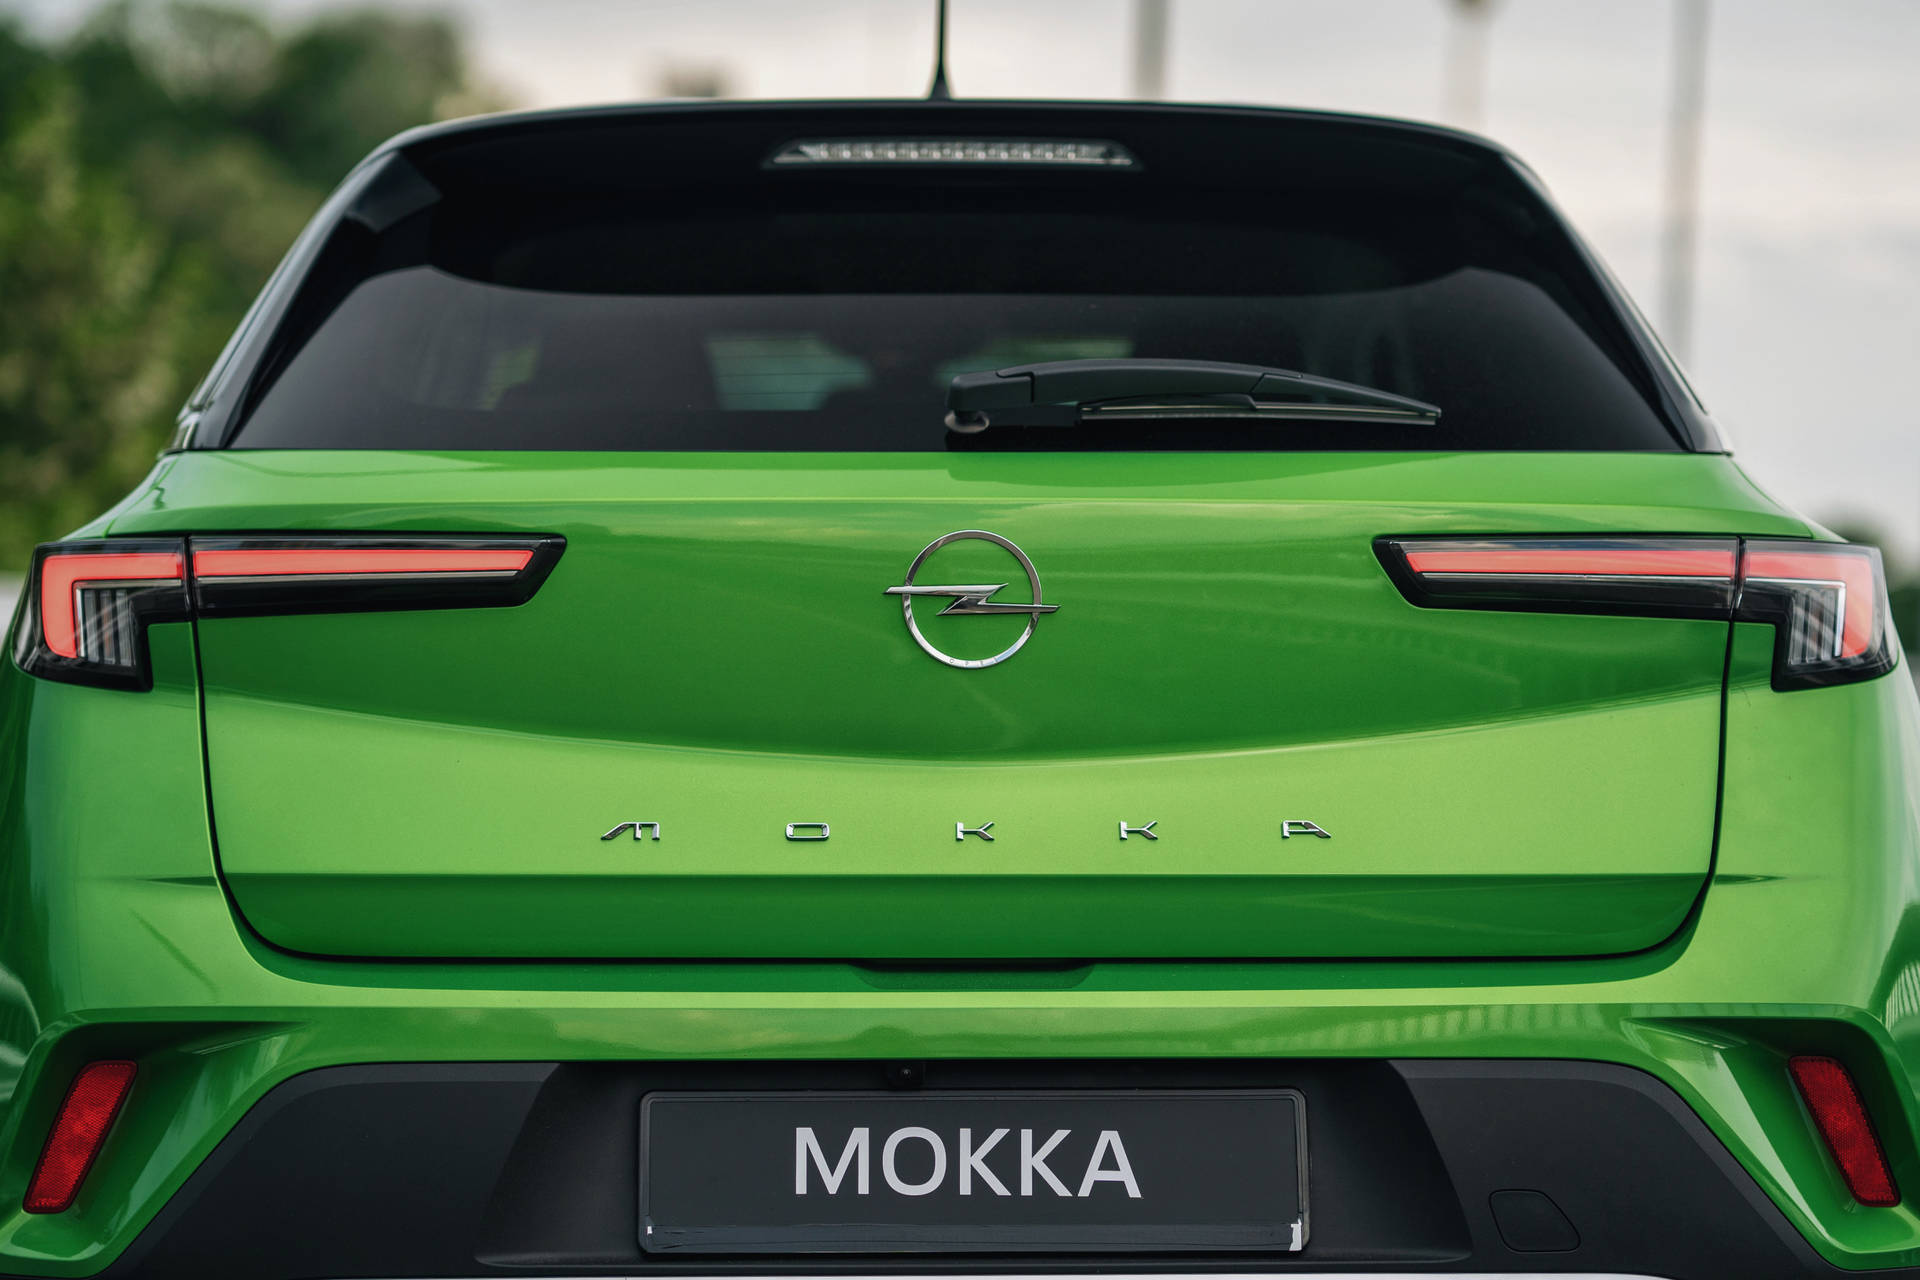 Picture Of Car In Green Minimalist Style